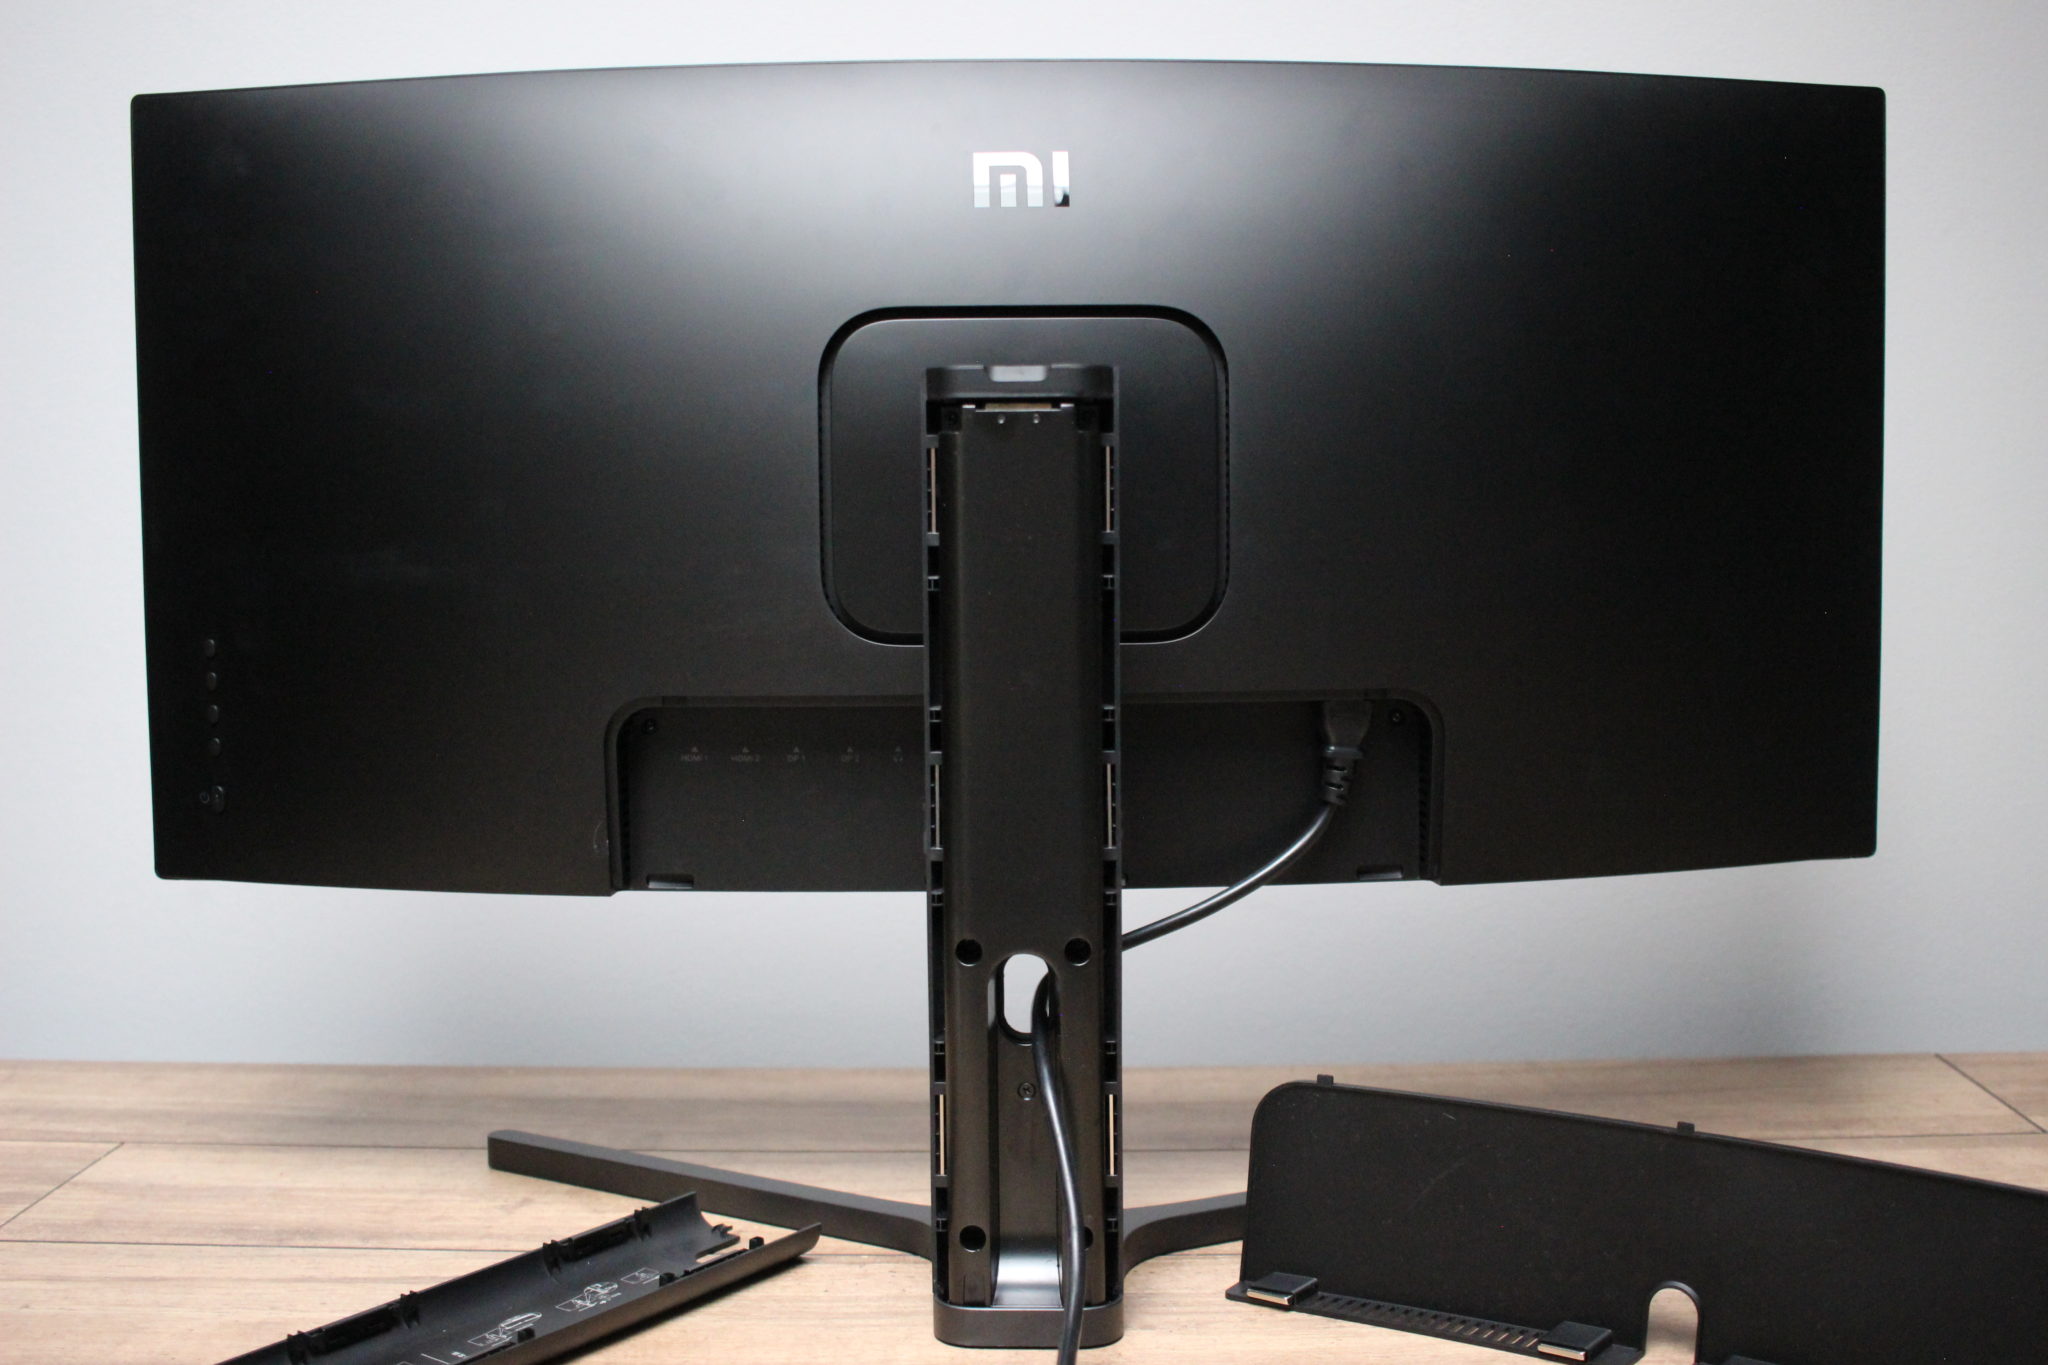 Xiaomi Curved Gaming-Monitor mit 34 Zoll & 144Hz | China-Gadgets